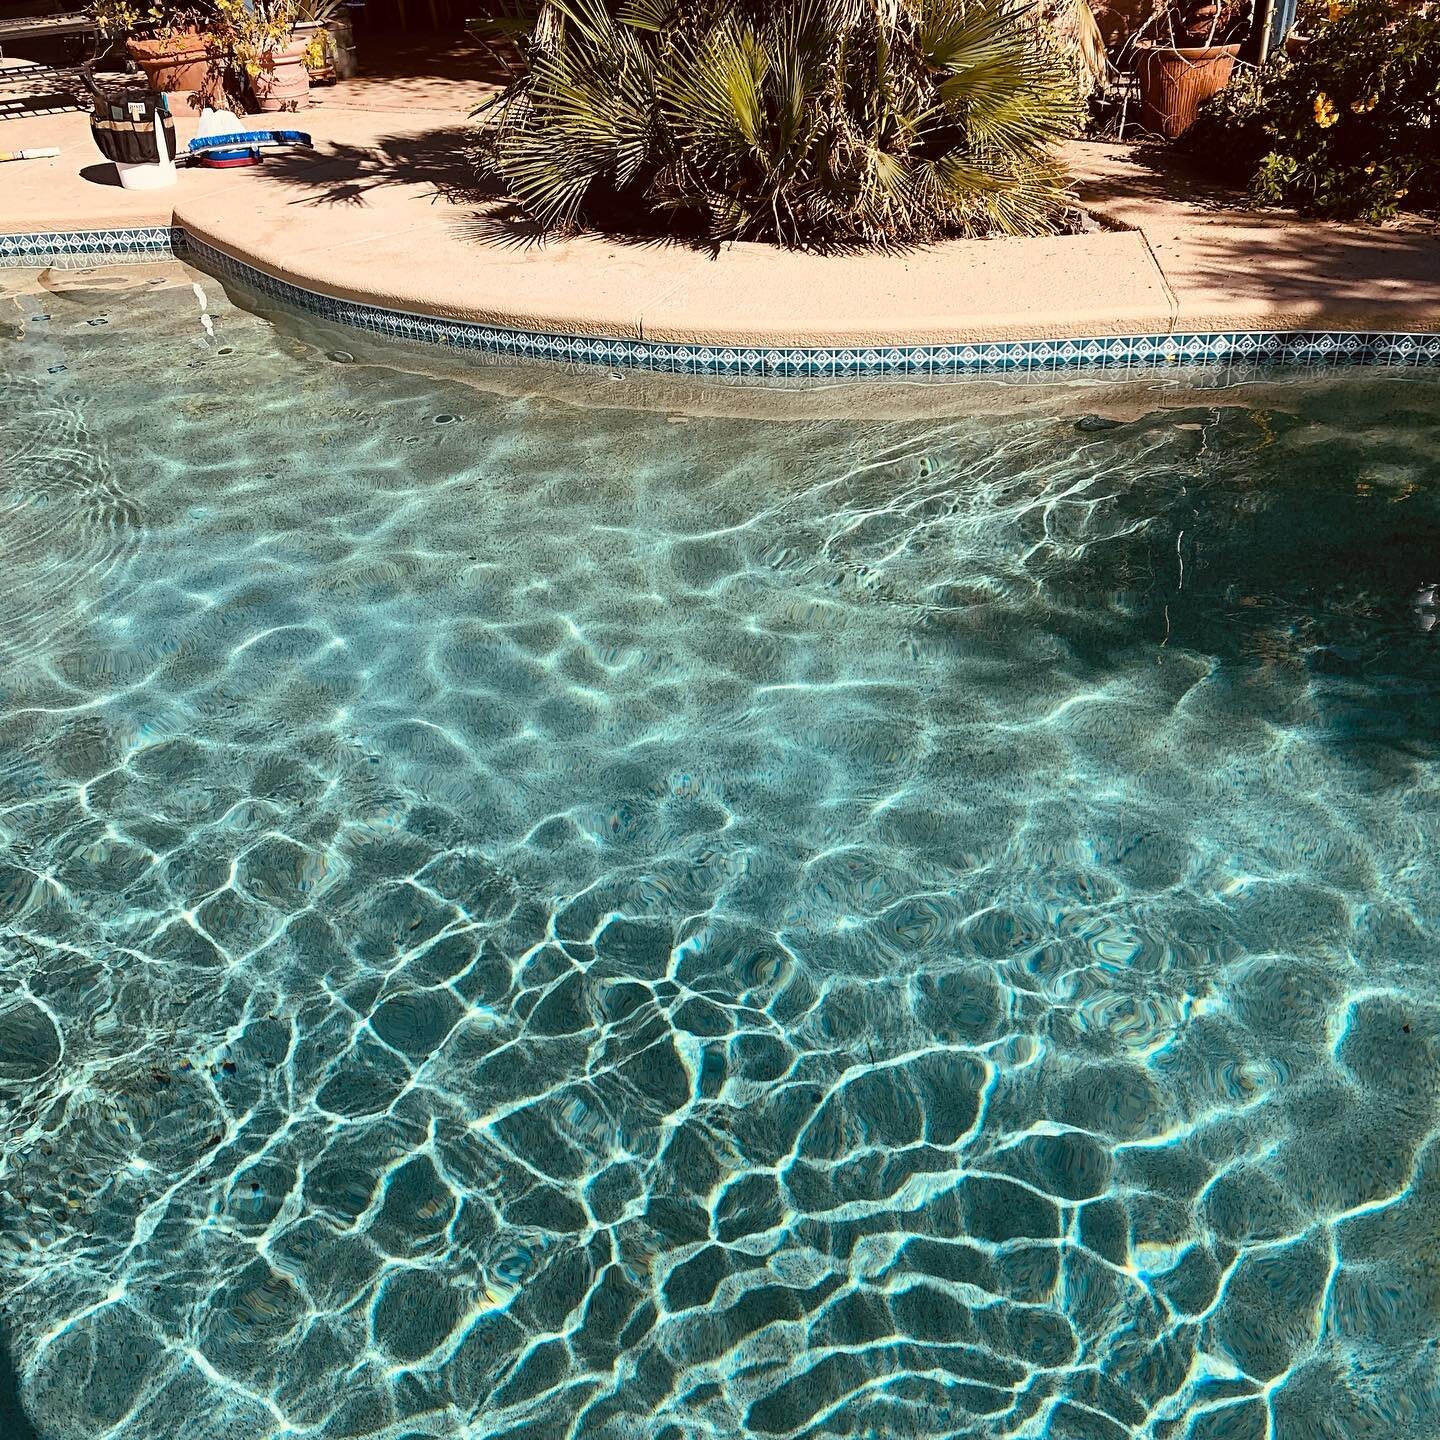 How To Start Your Own Pool Cleaning Business